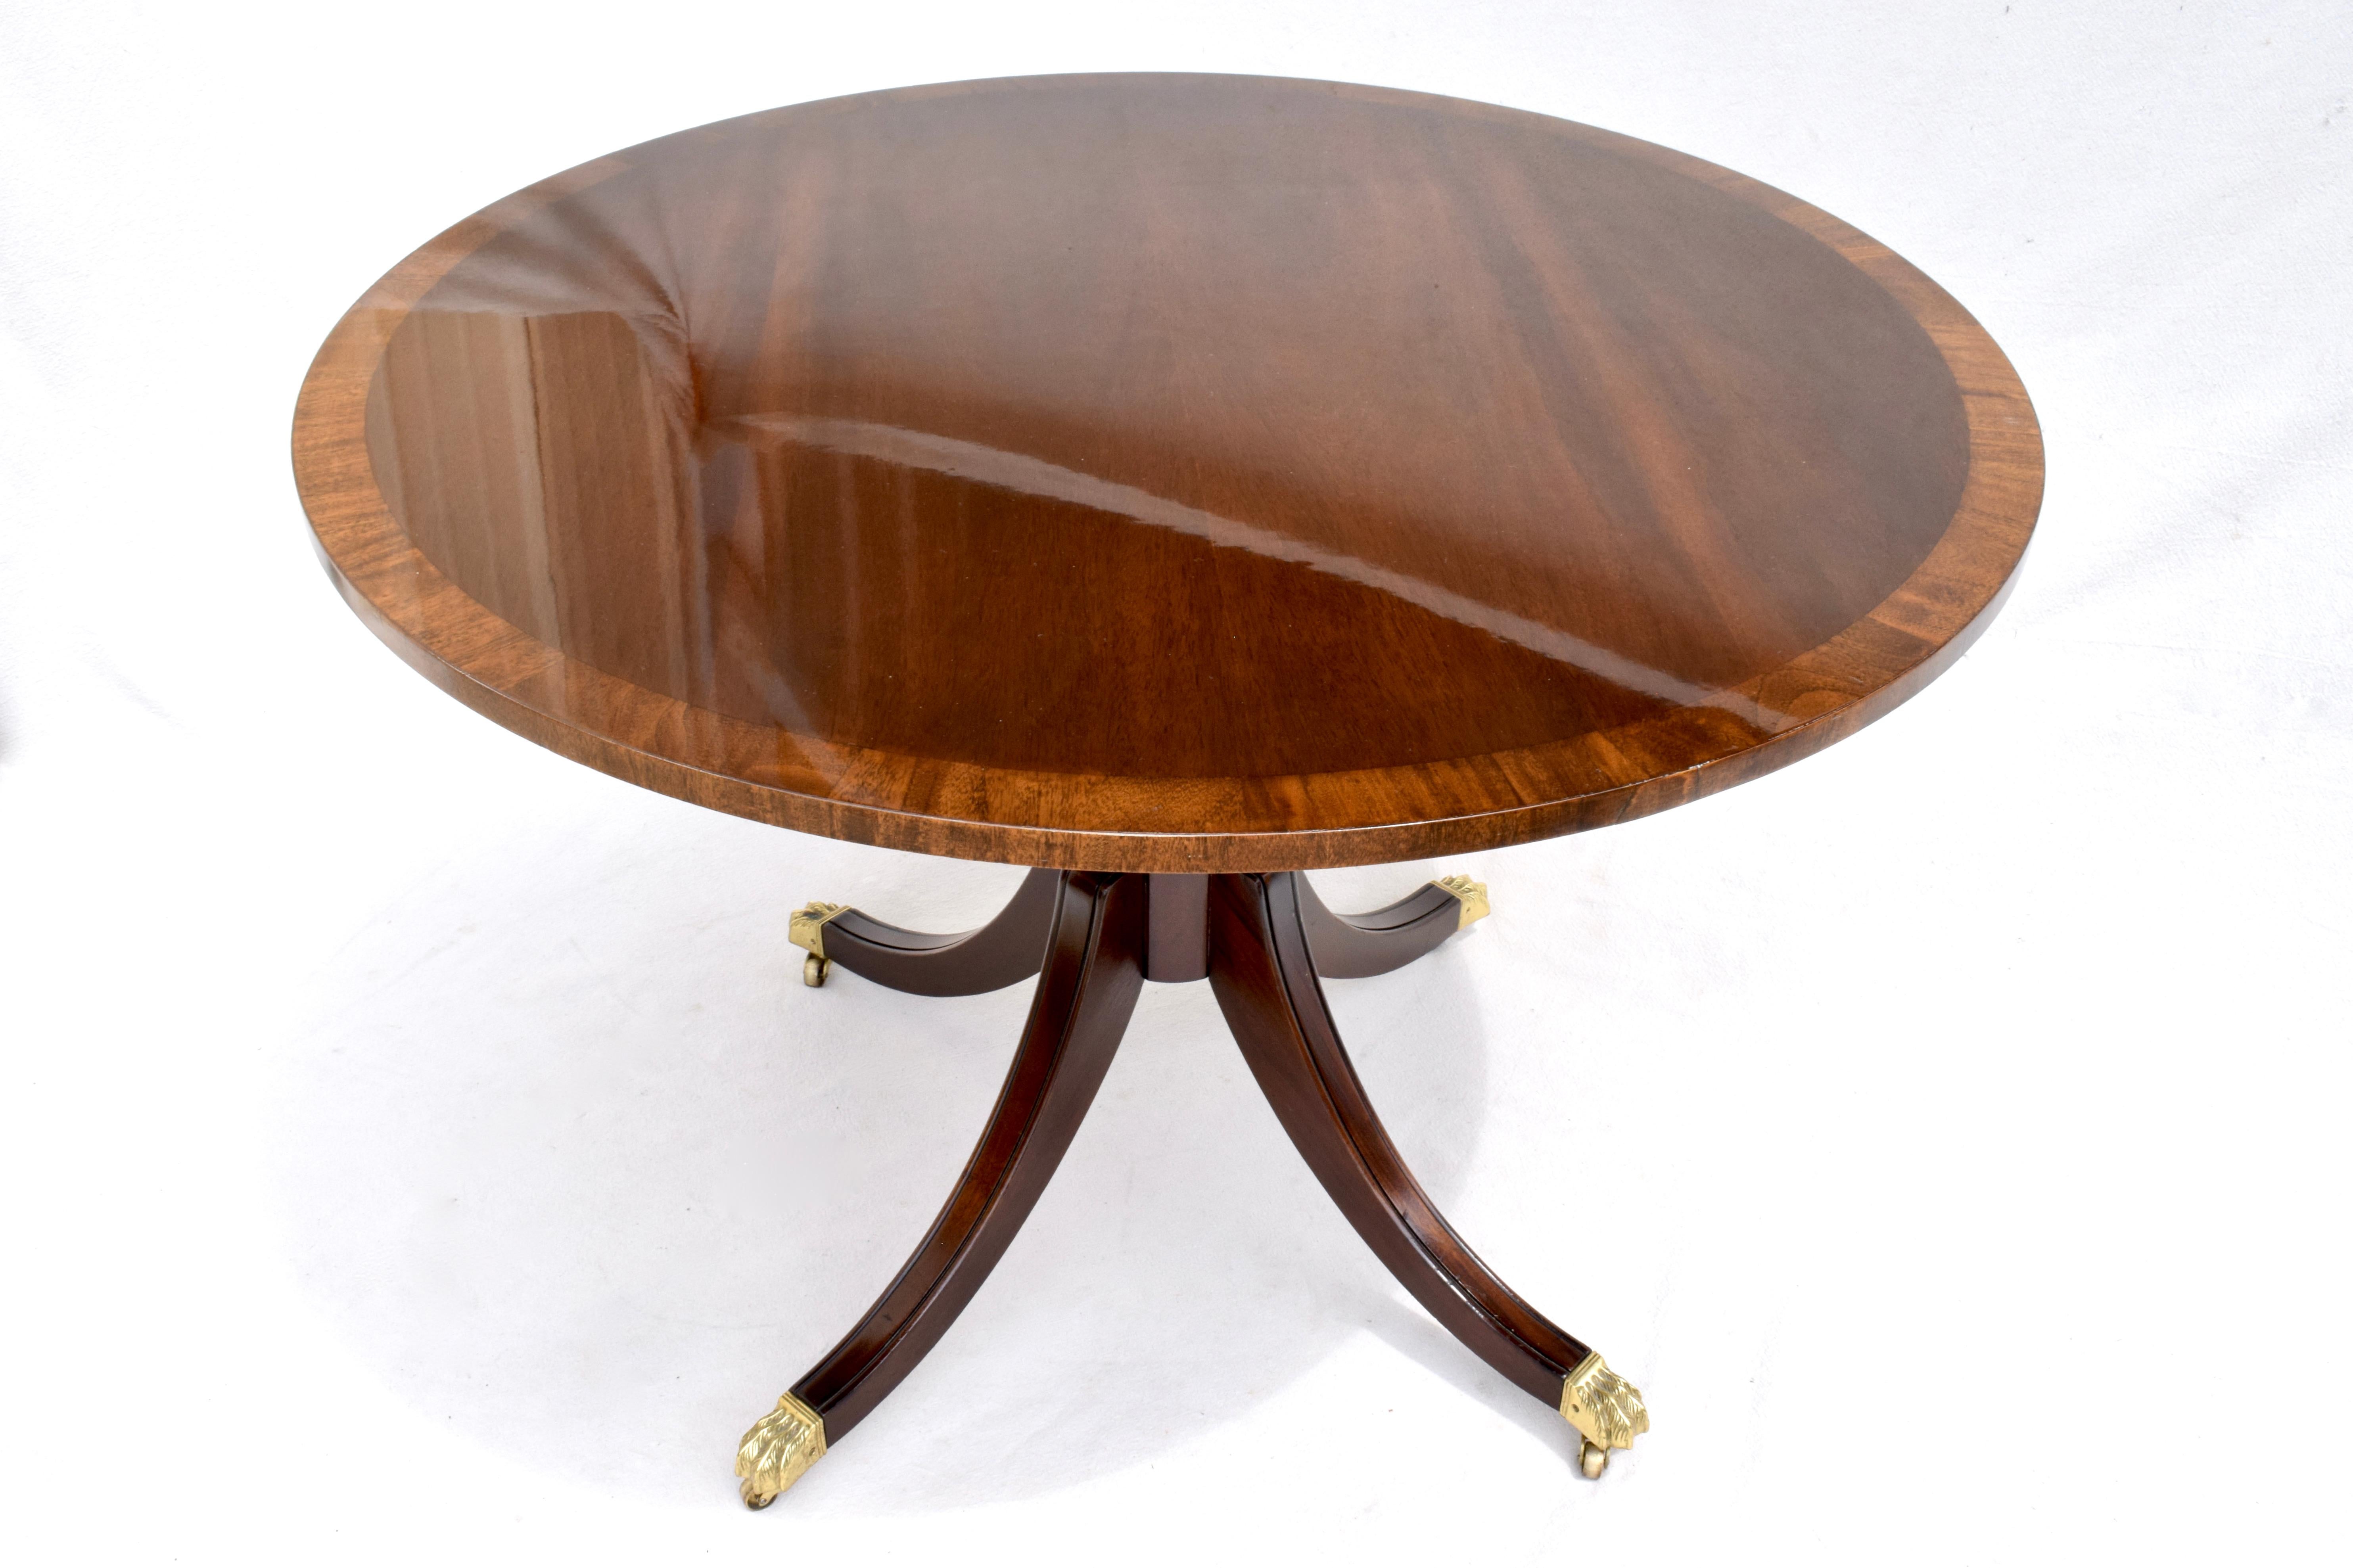 20th Century English Regency Style Center Table by Baker Furniture